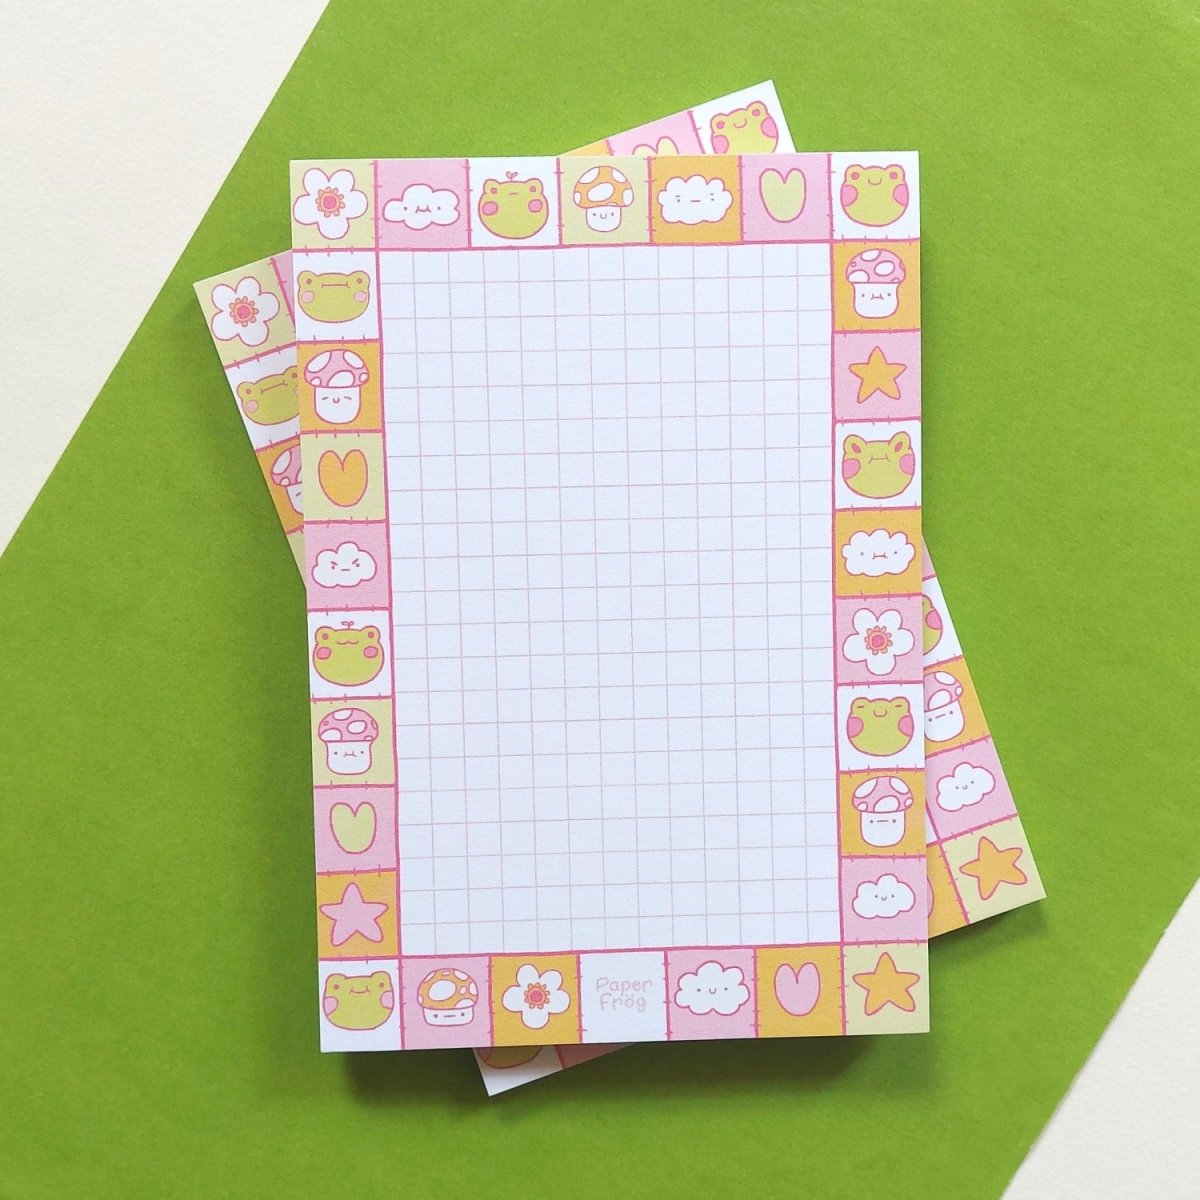 Cute and colourful Frog & Mushroom Memo notepad by Paperfrog